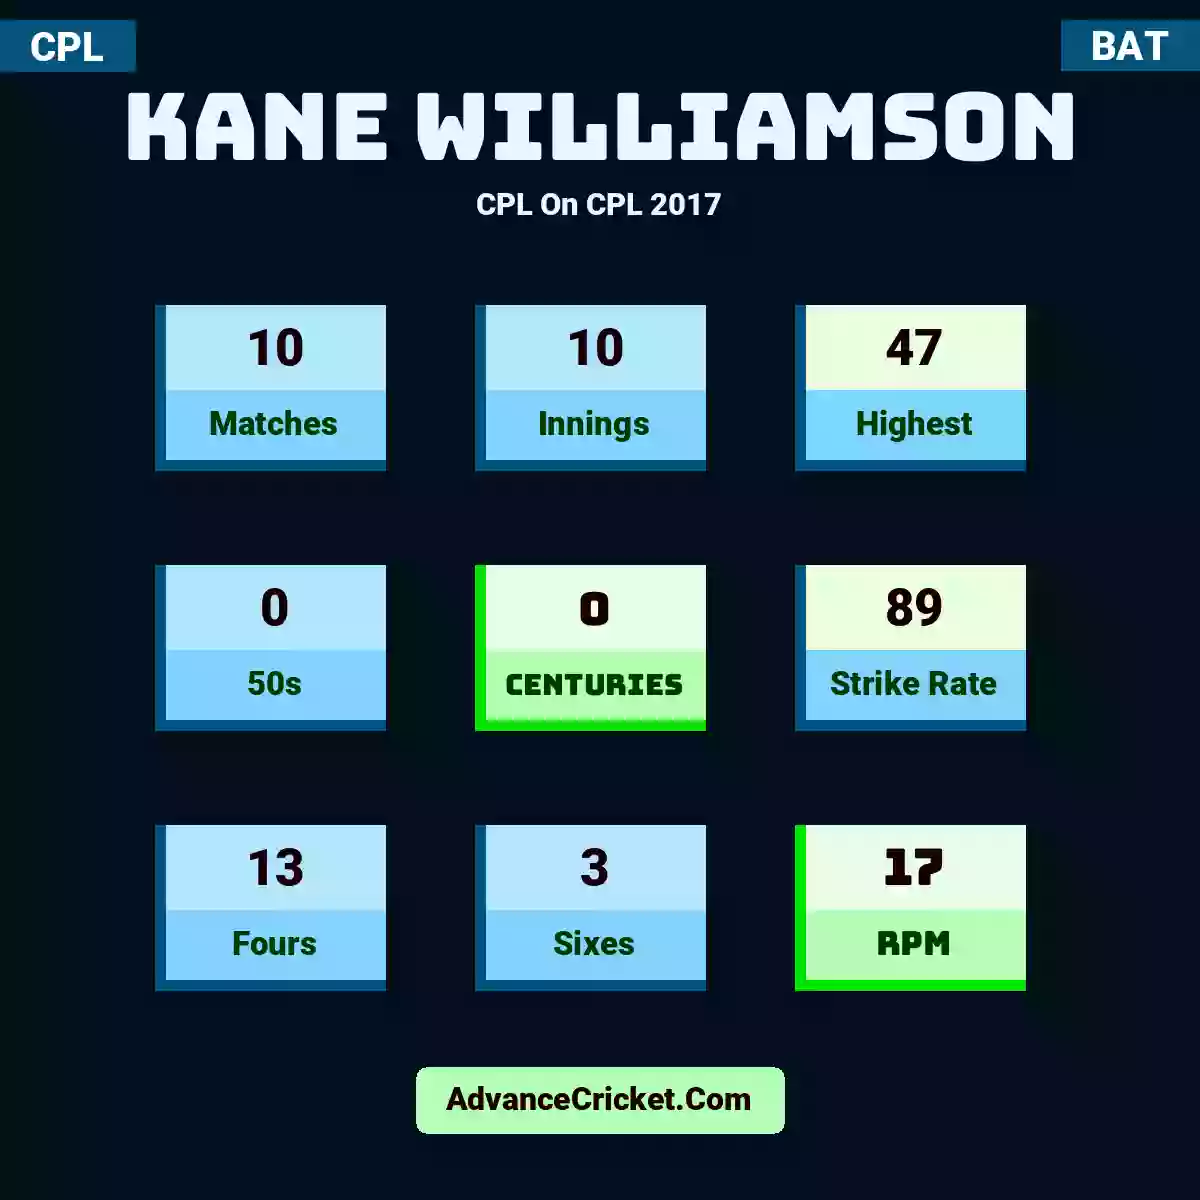 Kane Williamson CPL  On CPL 2017, Kane Williamson played 10 matches, scored 47 runs as highest, 0 half-centuries, and 0 centuries, with a strike rate of 89. K.Williamson hit 13 fours and 3 sixes, with an RPM of 17.